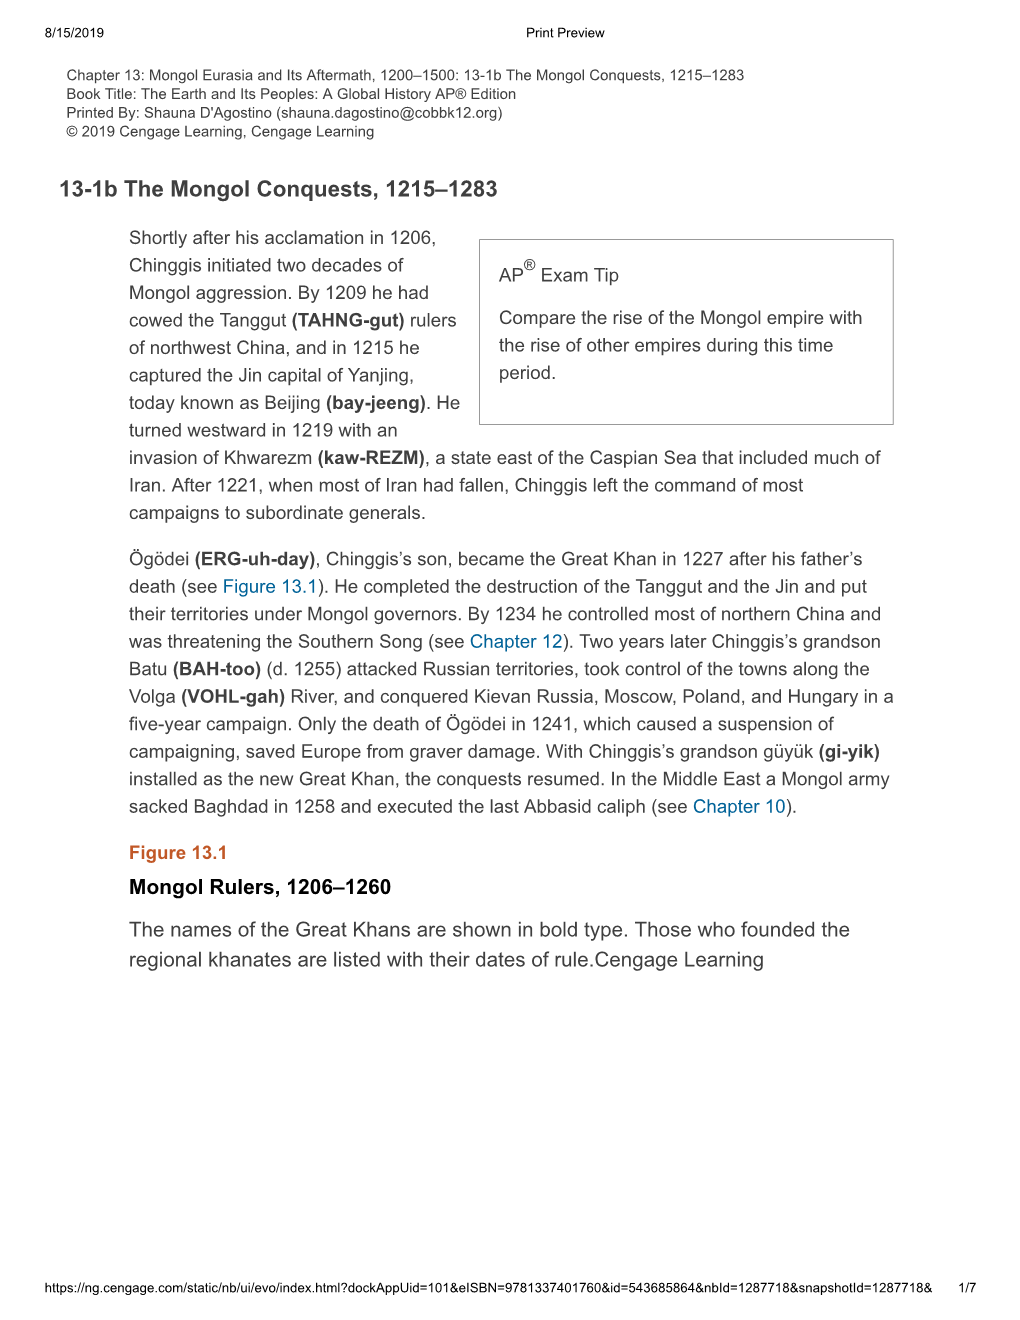 13-1B the Mongol Conquests, 1215–1283